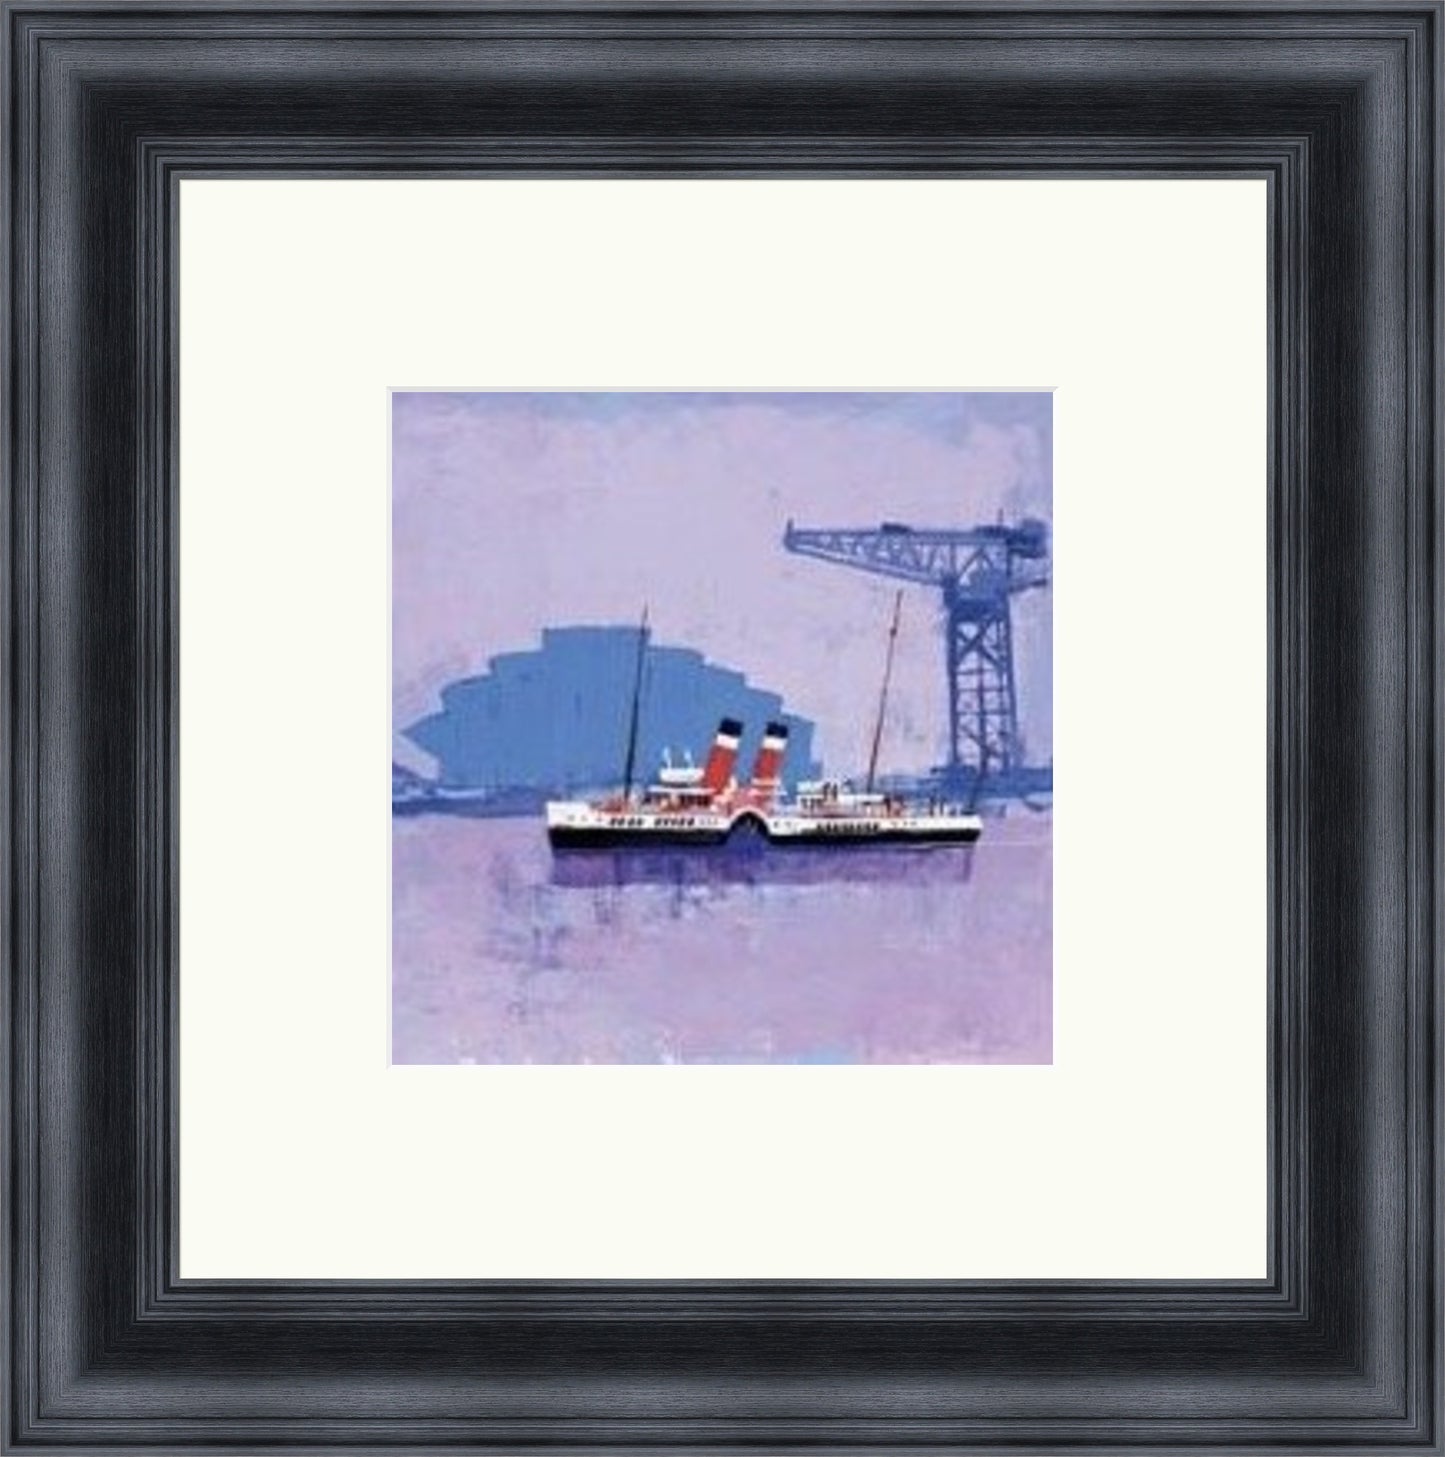 The Waverley on the Clyde by Colin Ruffell